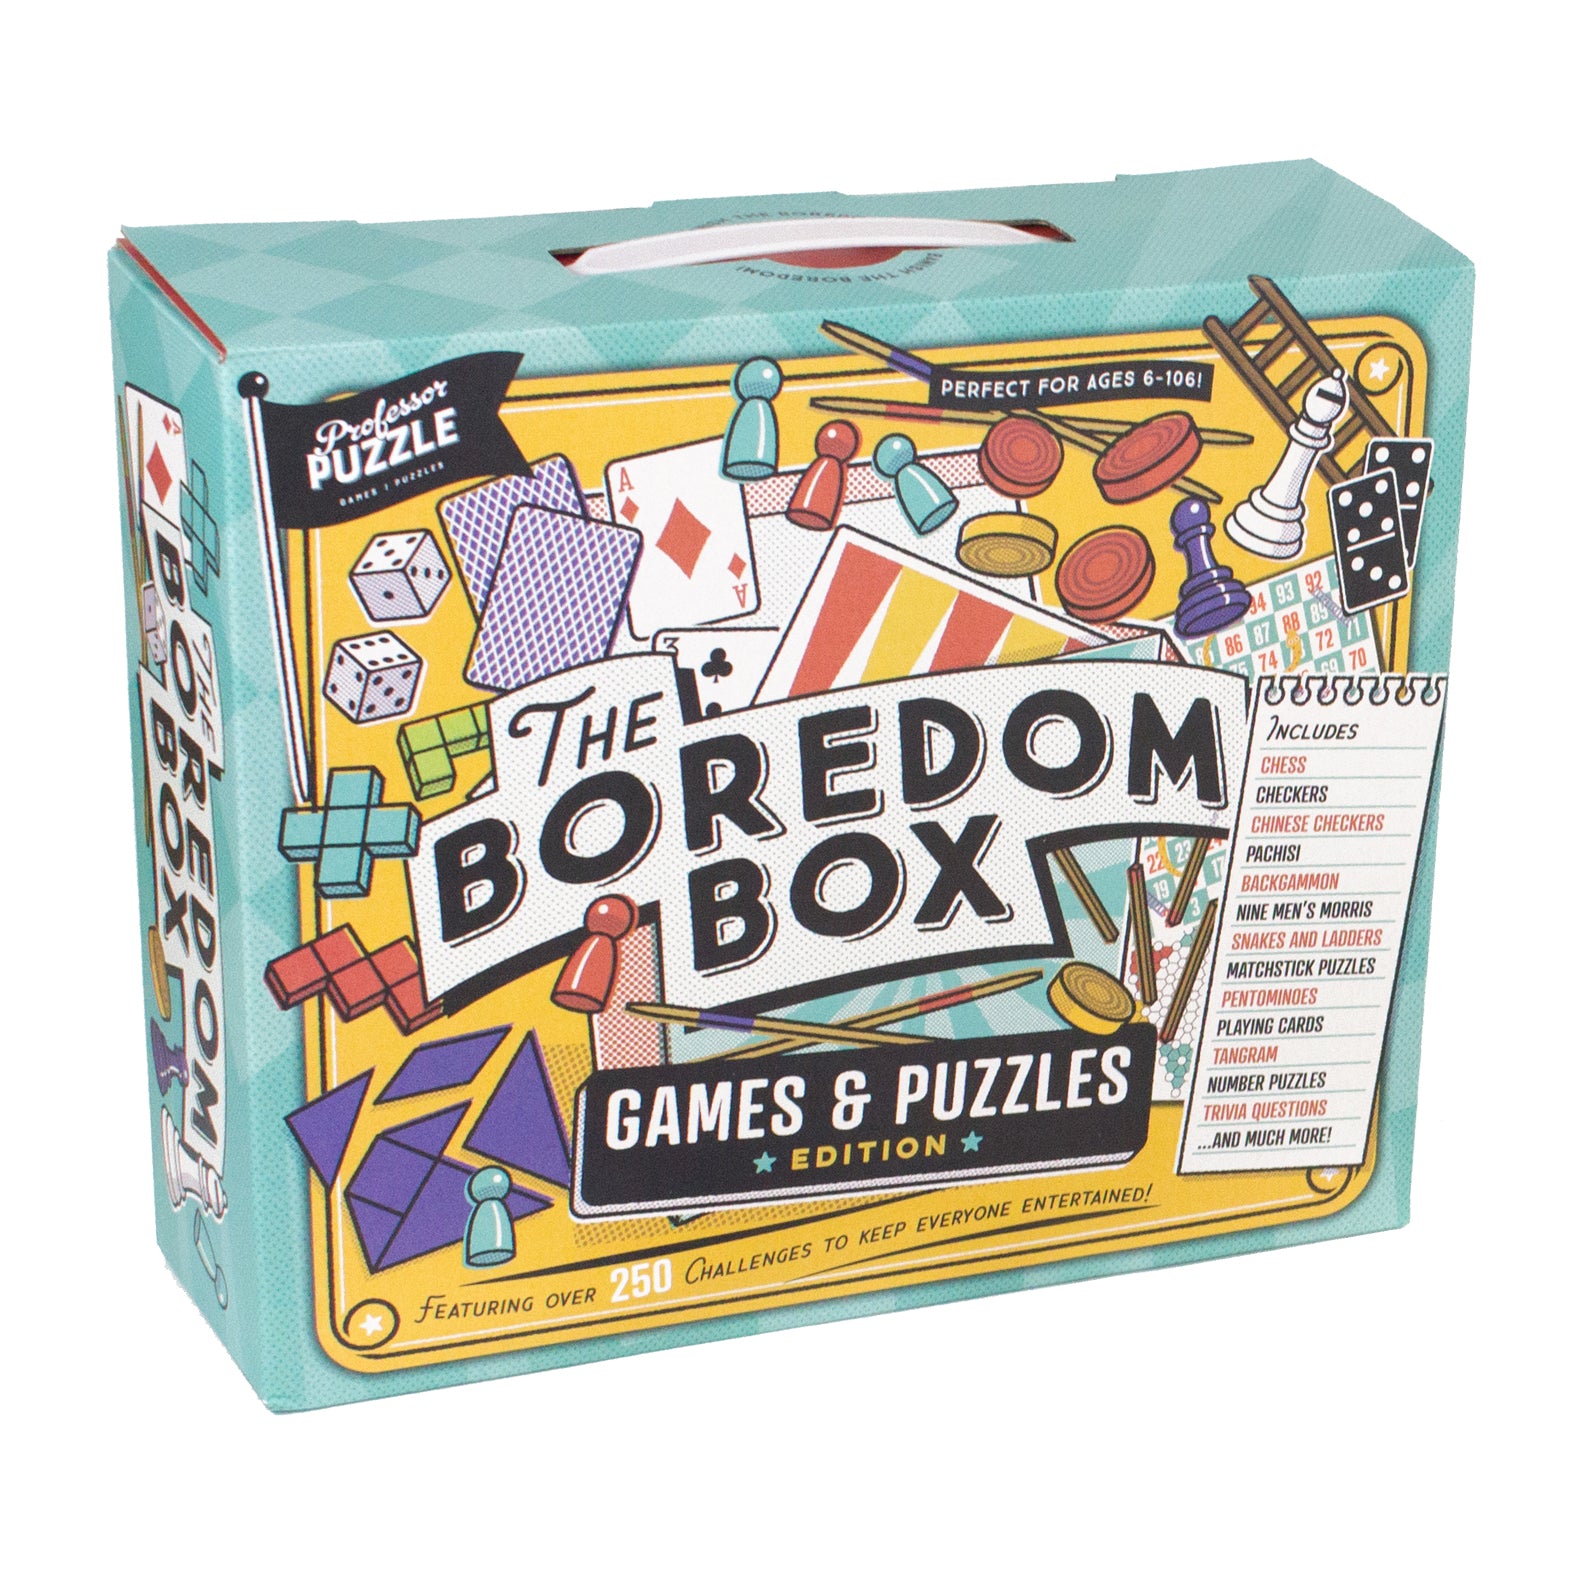 A box with handle containing a selection of games and puzzles